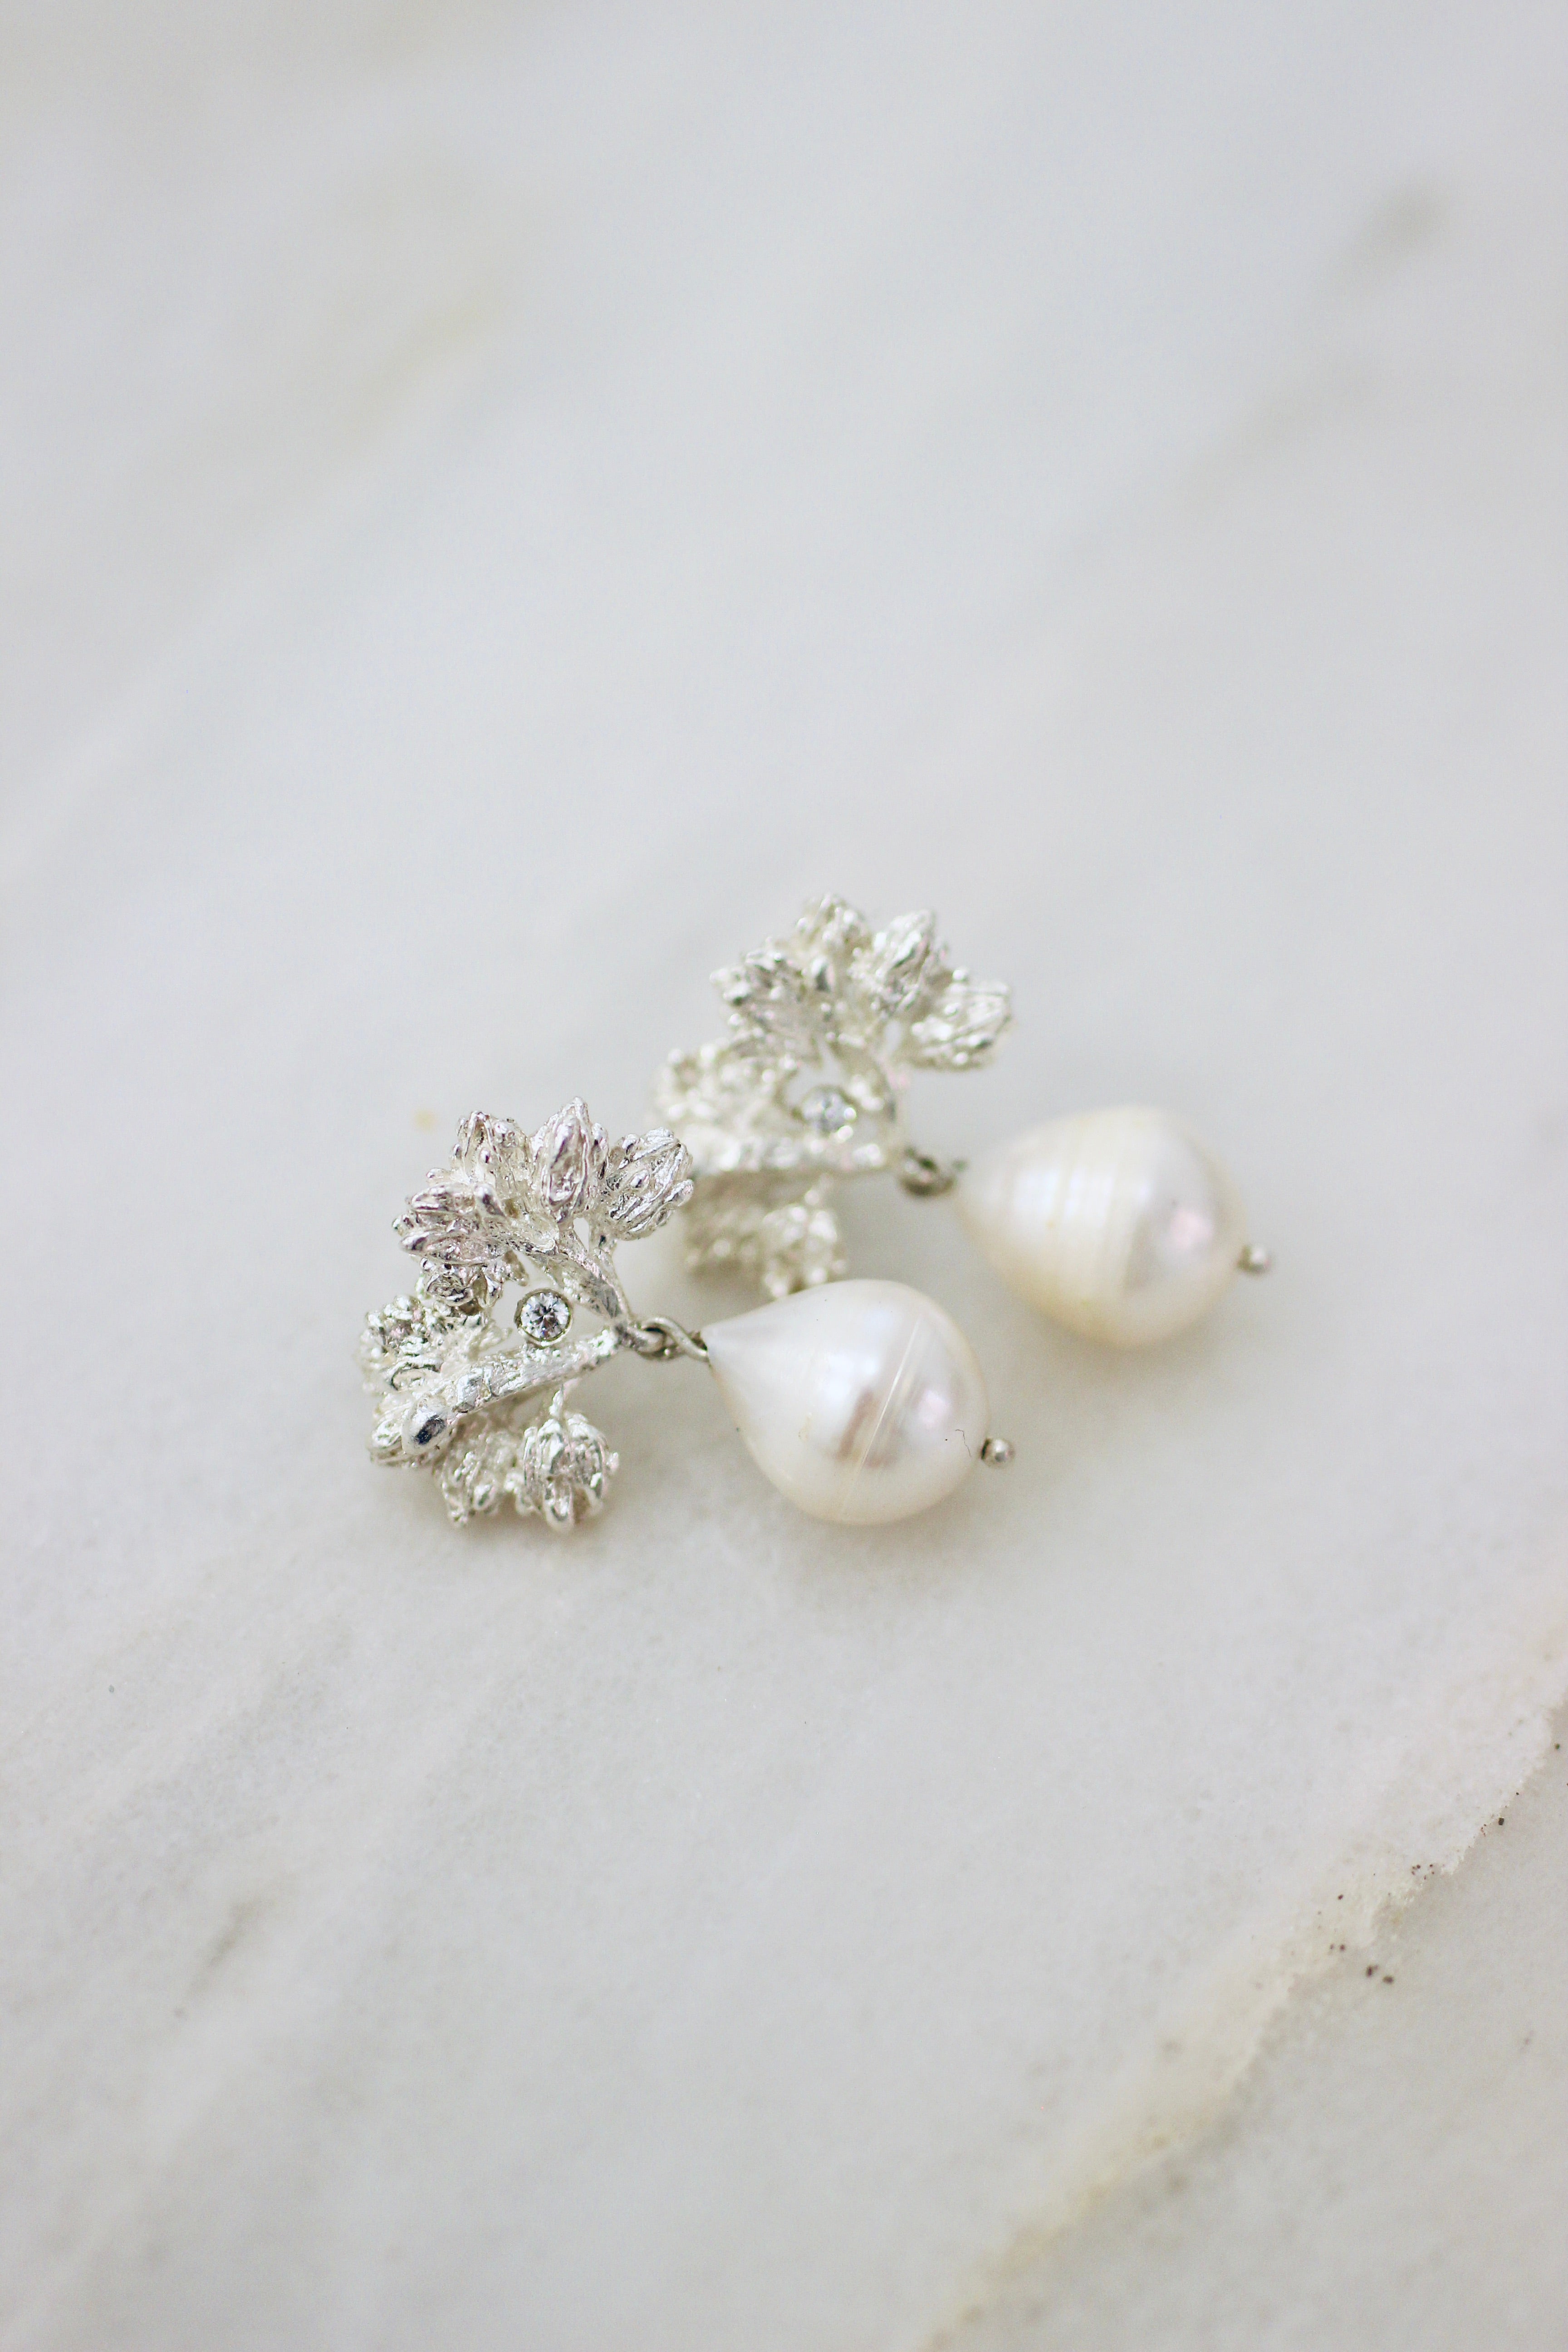 A pair of Cremilde Bispo Jewellery's Pearly Forest Earrings with Baroque Pearl accents on a marble surface.